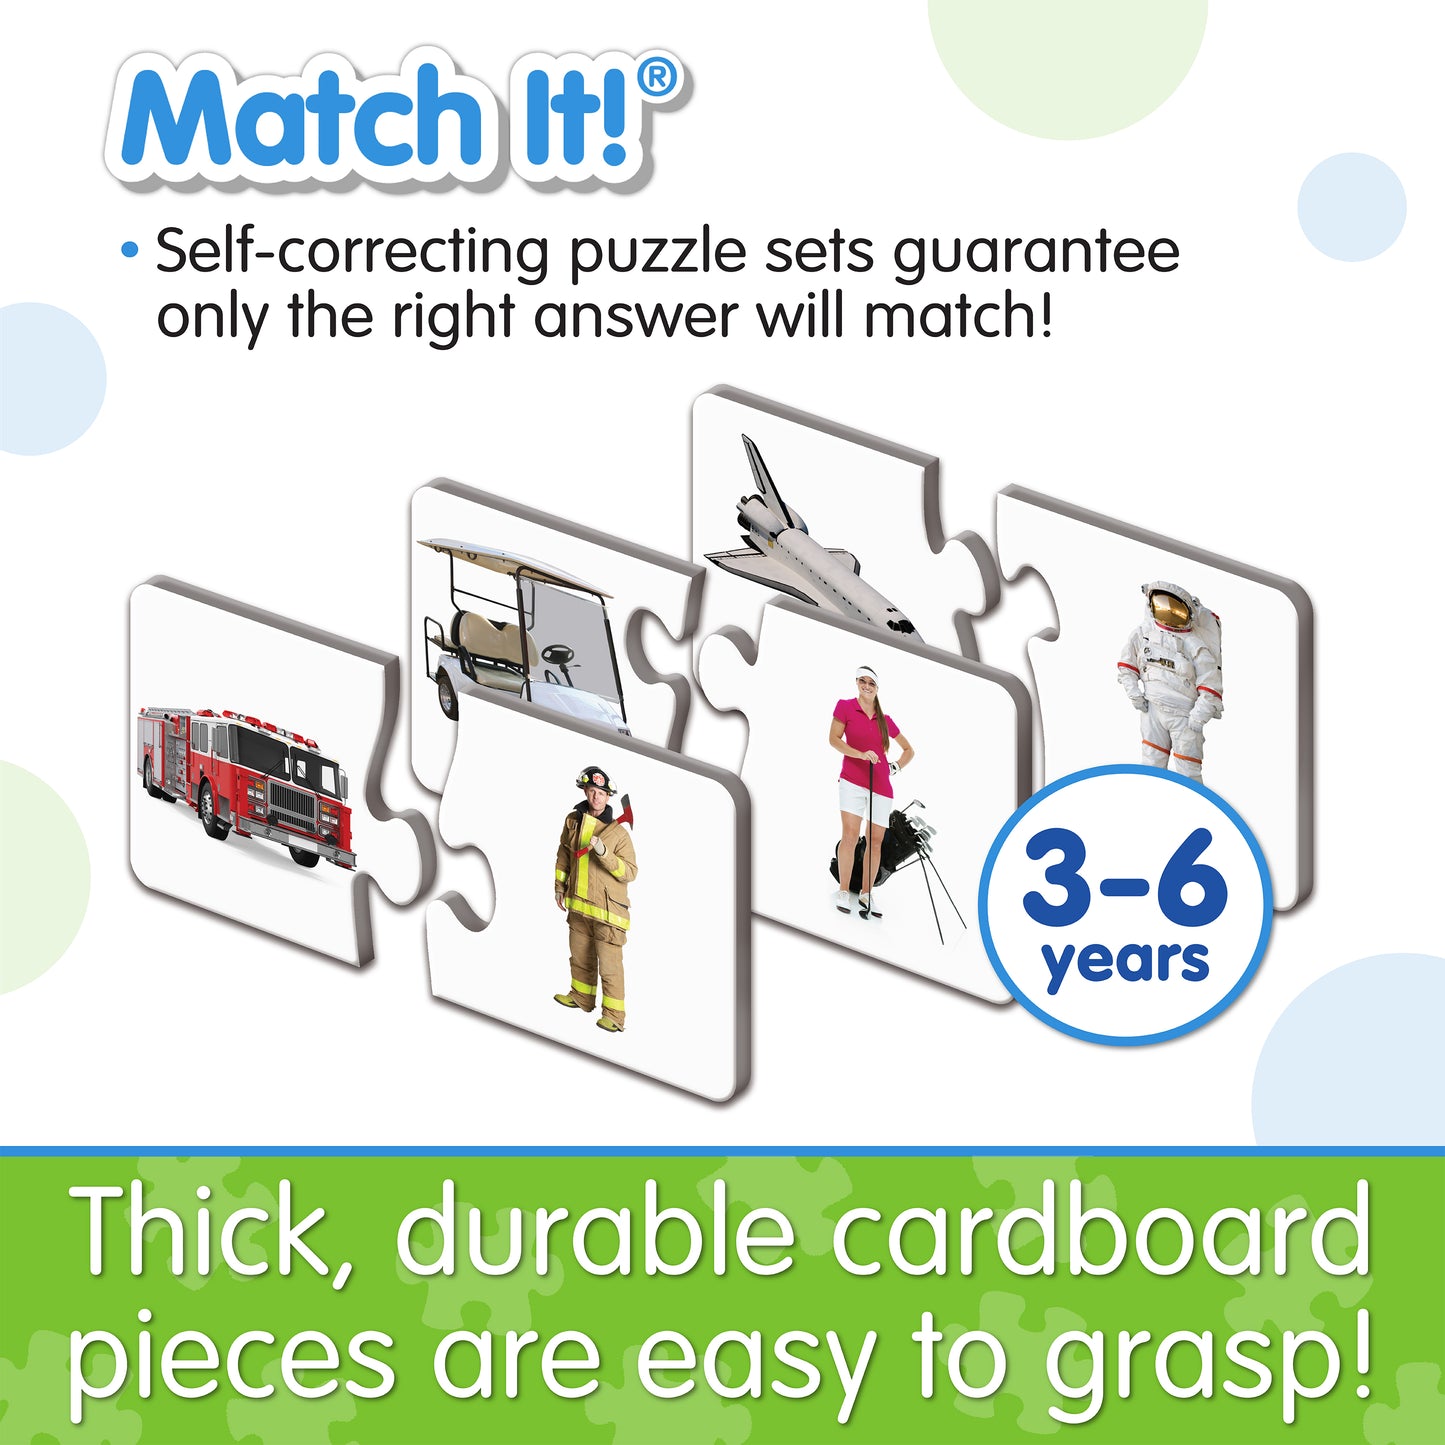 Infographic about Match It - Match My Ride's features that says, "Thick, durable cardboard pieces are easy to grasp!"